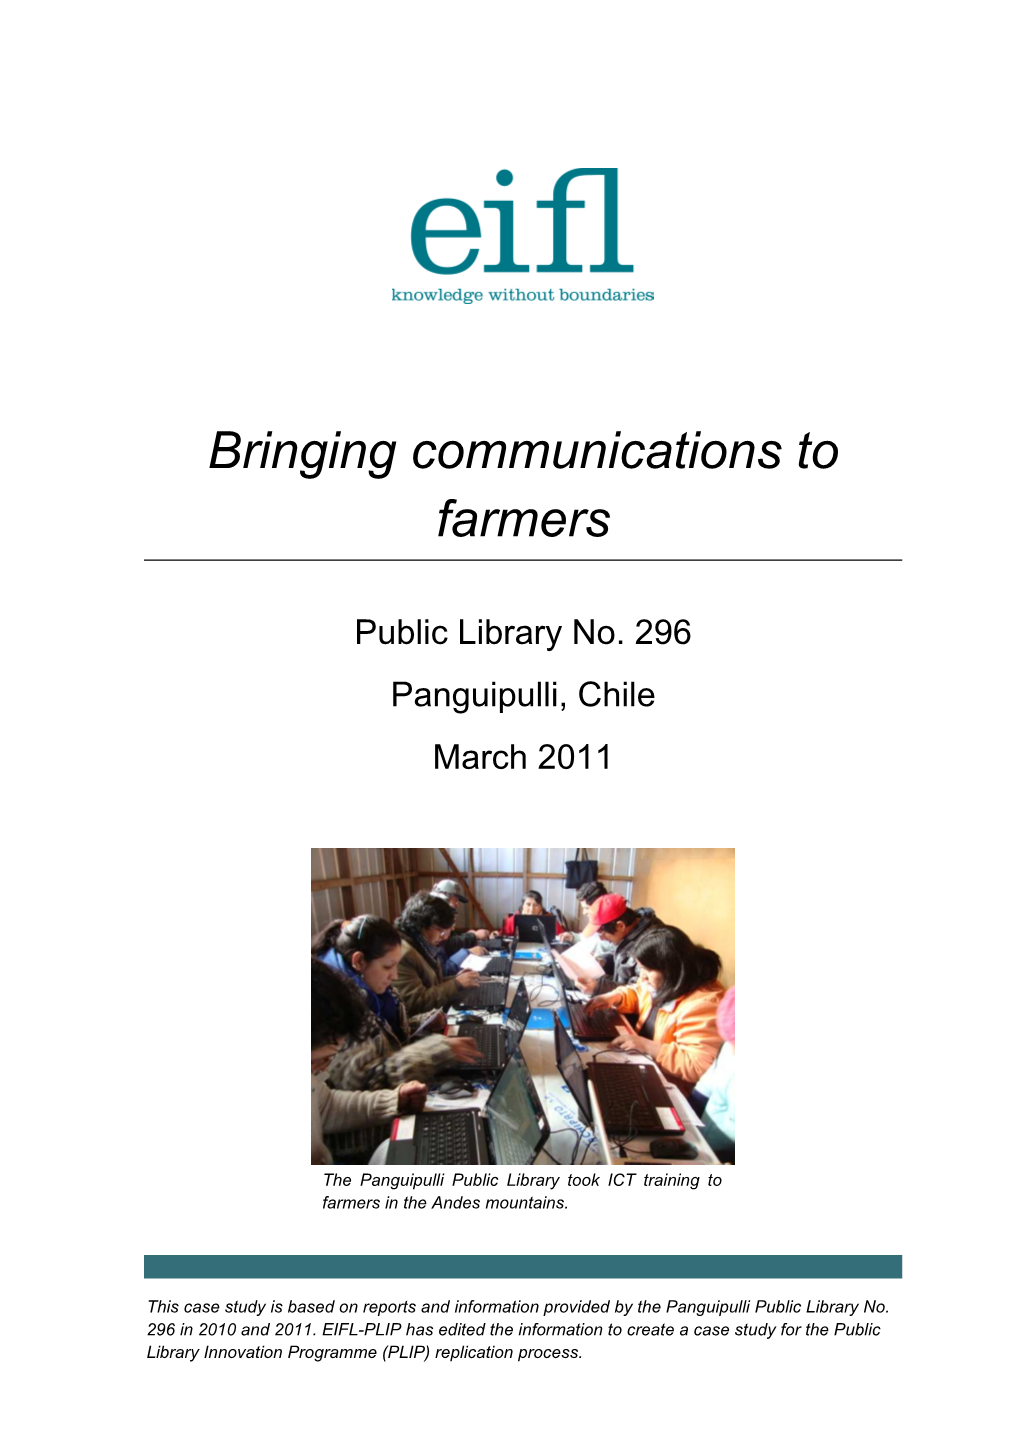 Bringing Communications to Farmers